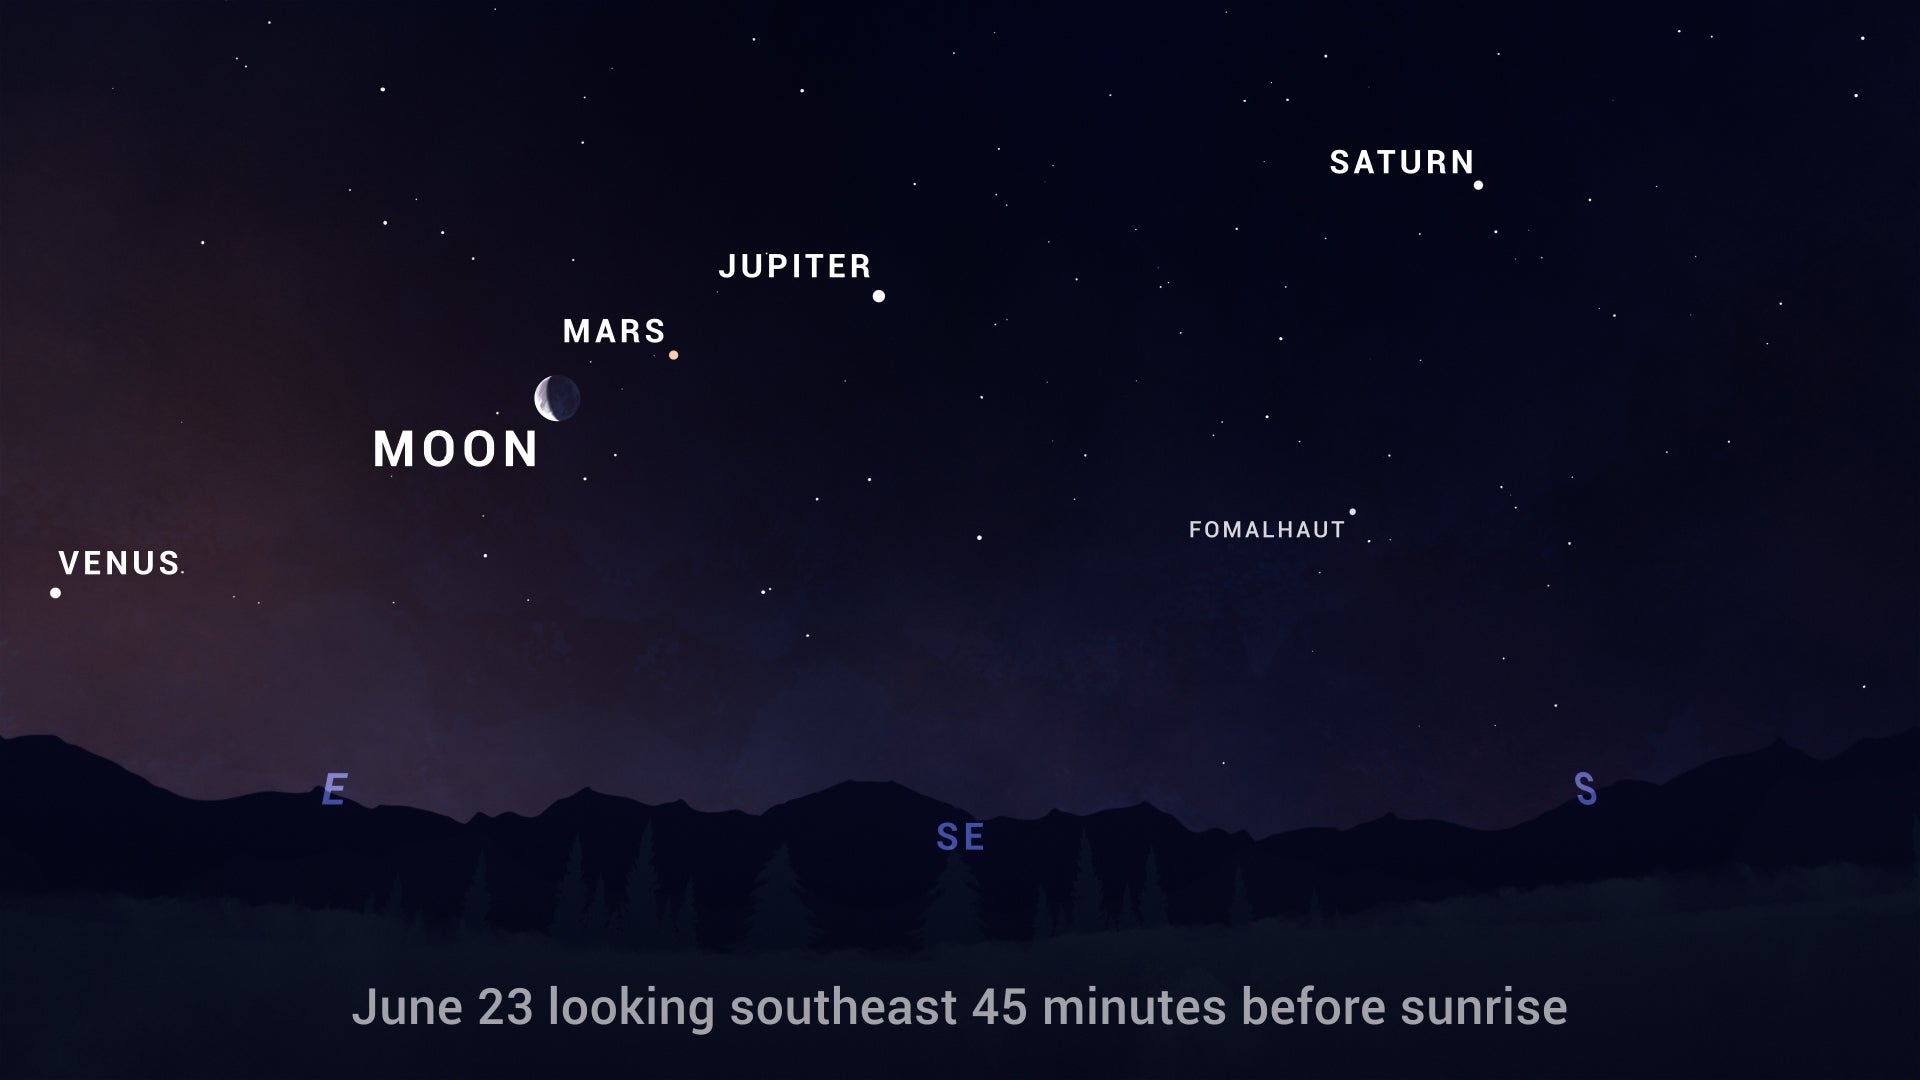 A NASA image shows the expected view of the sky on 23 June